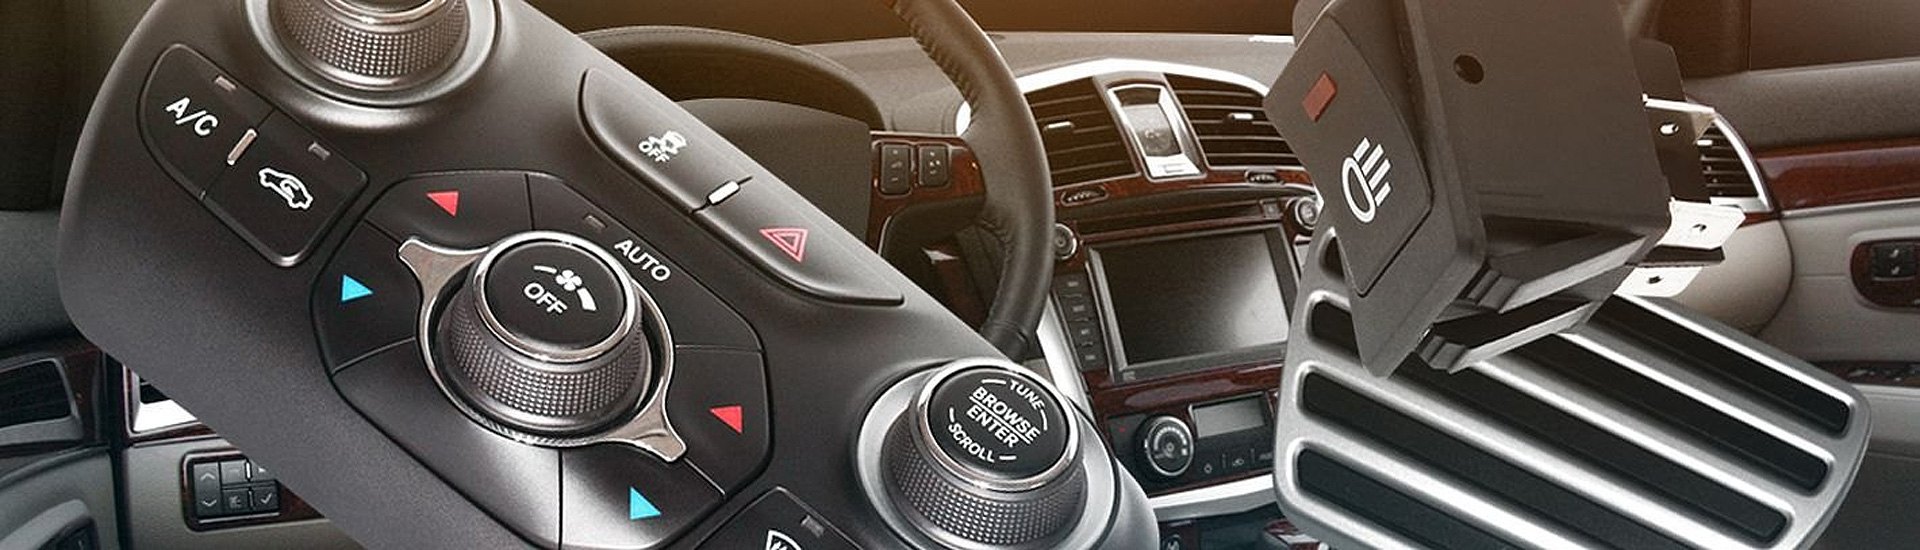 Interior Parts Restore Your Passenger Compartment's Functions